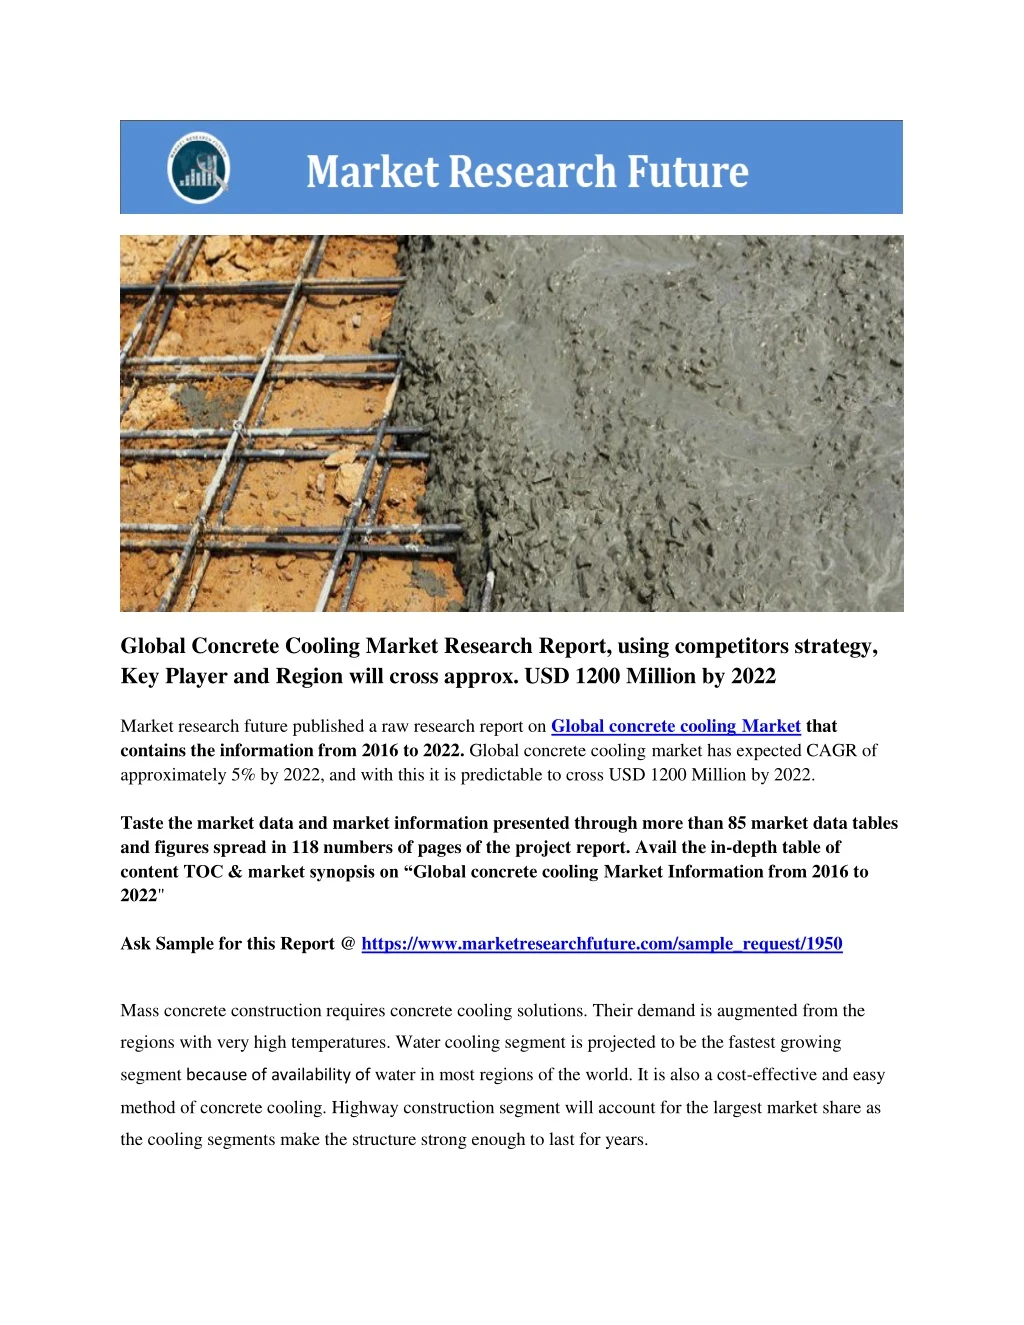 global concrete cooling market research report